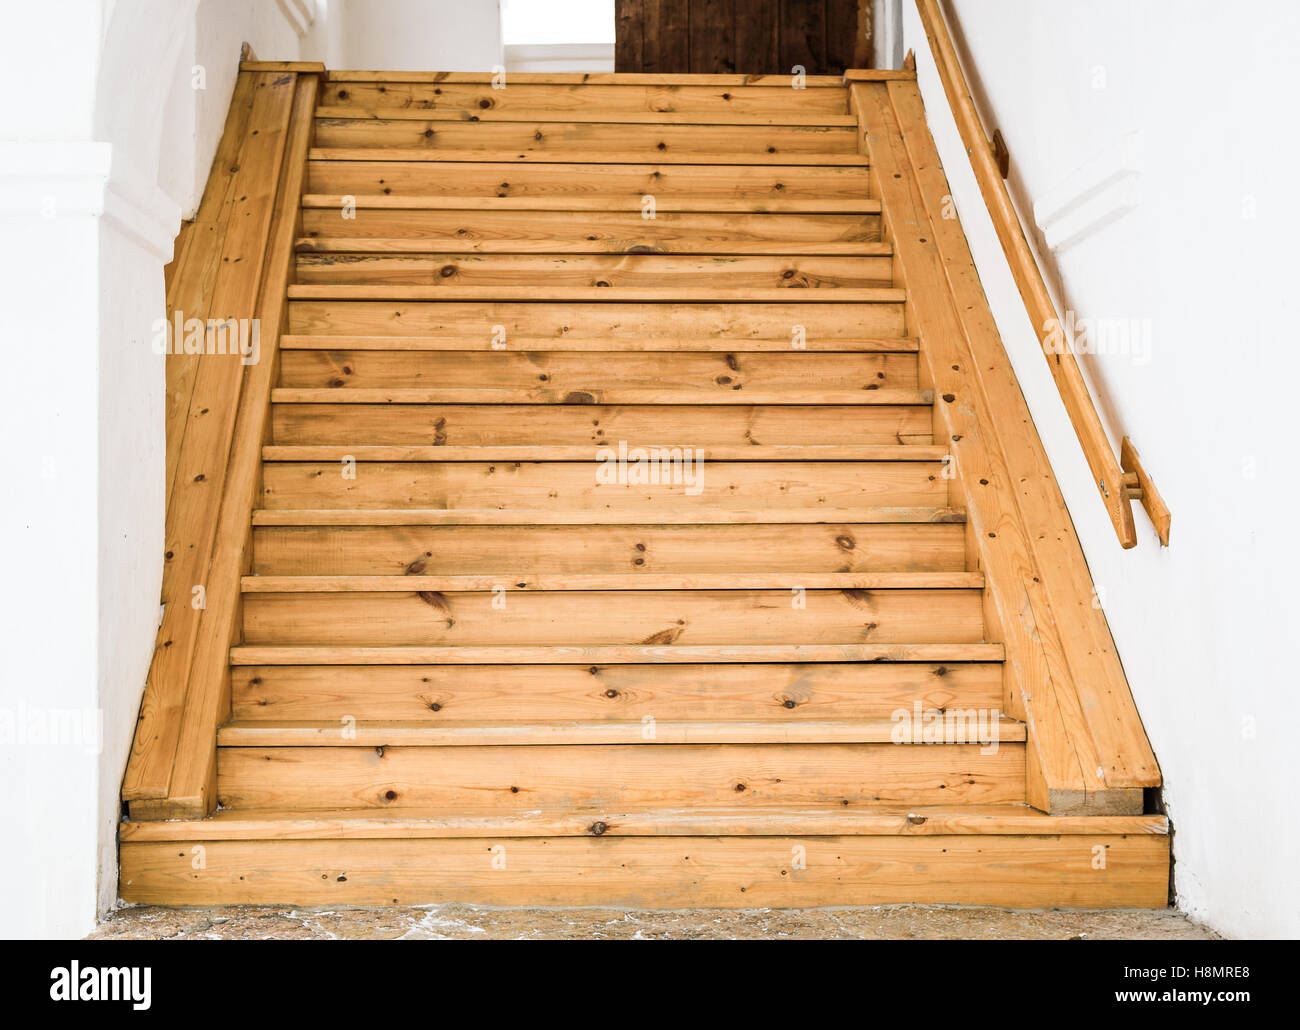 the wooden staircase and railing against white walls Stock Photo